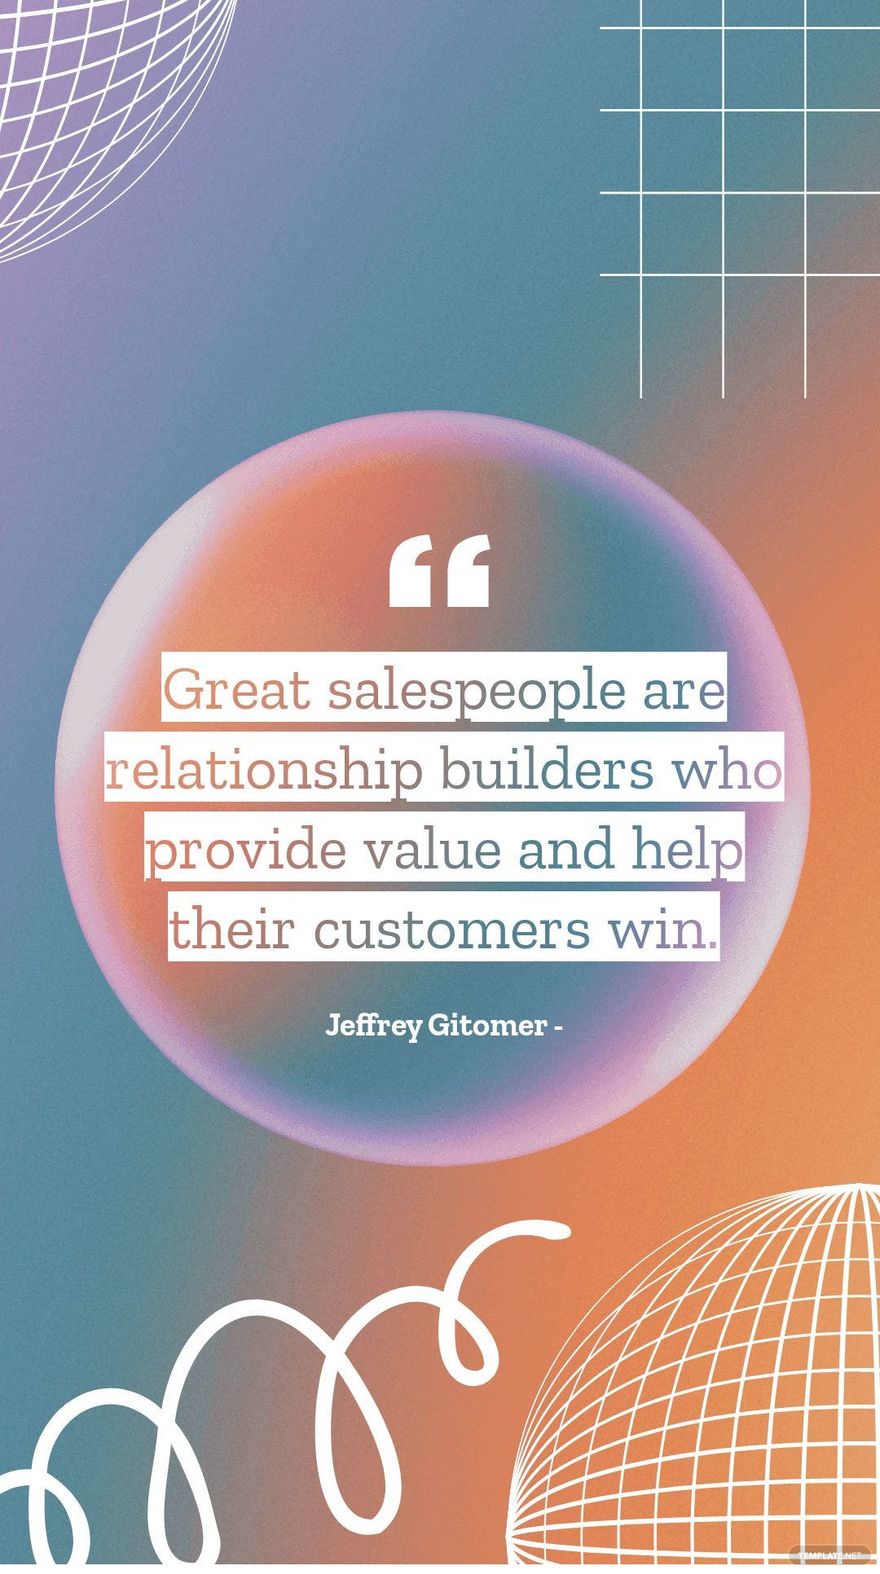 Jeffrey Gitomer  Great salespeople are relationship builders who provide value and help their customers win